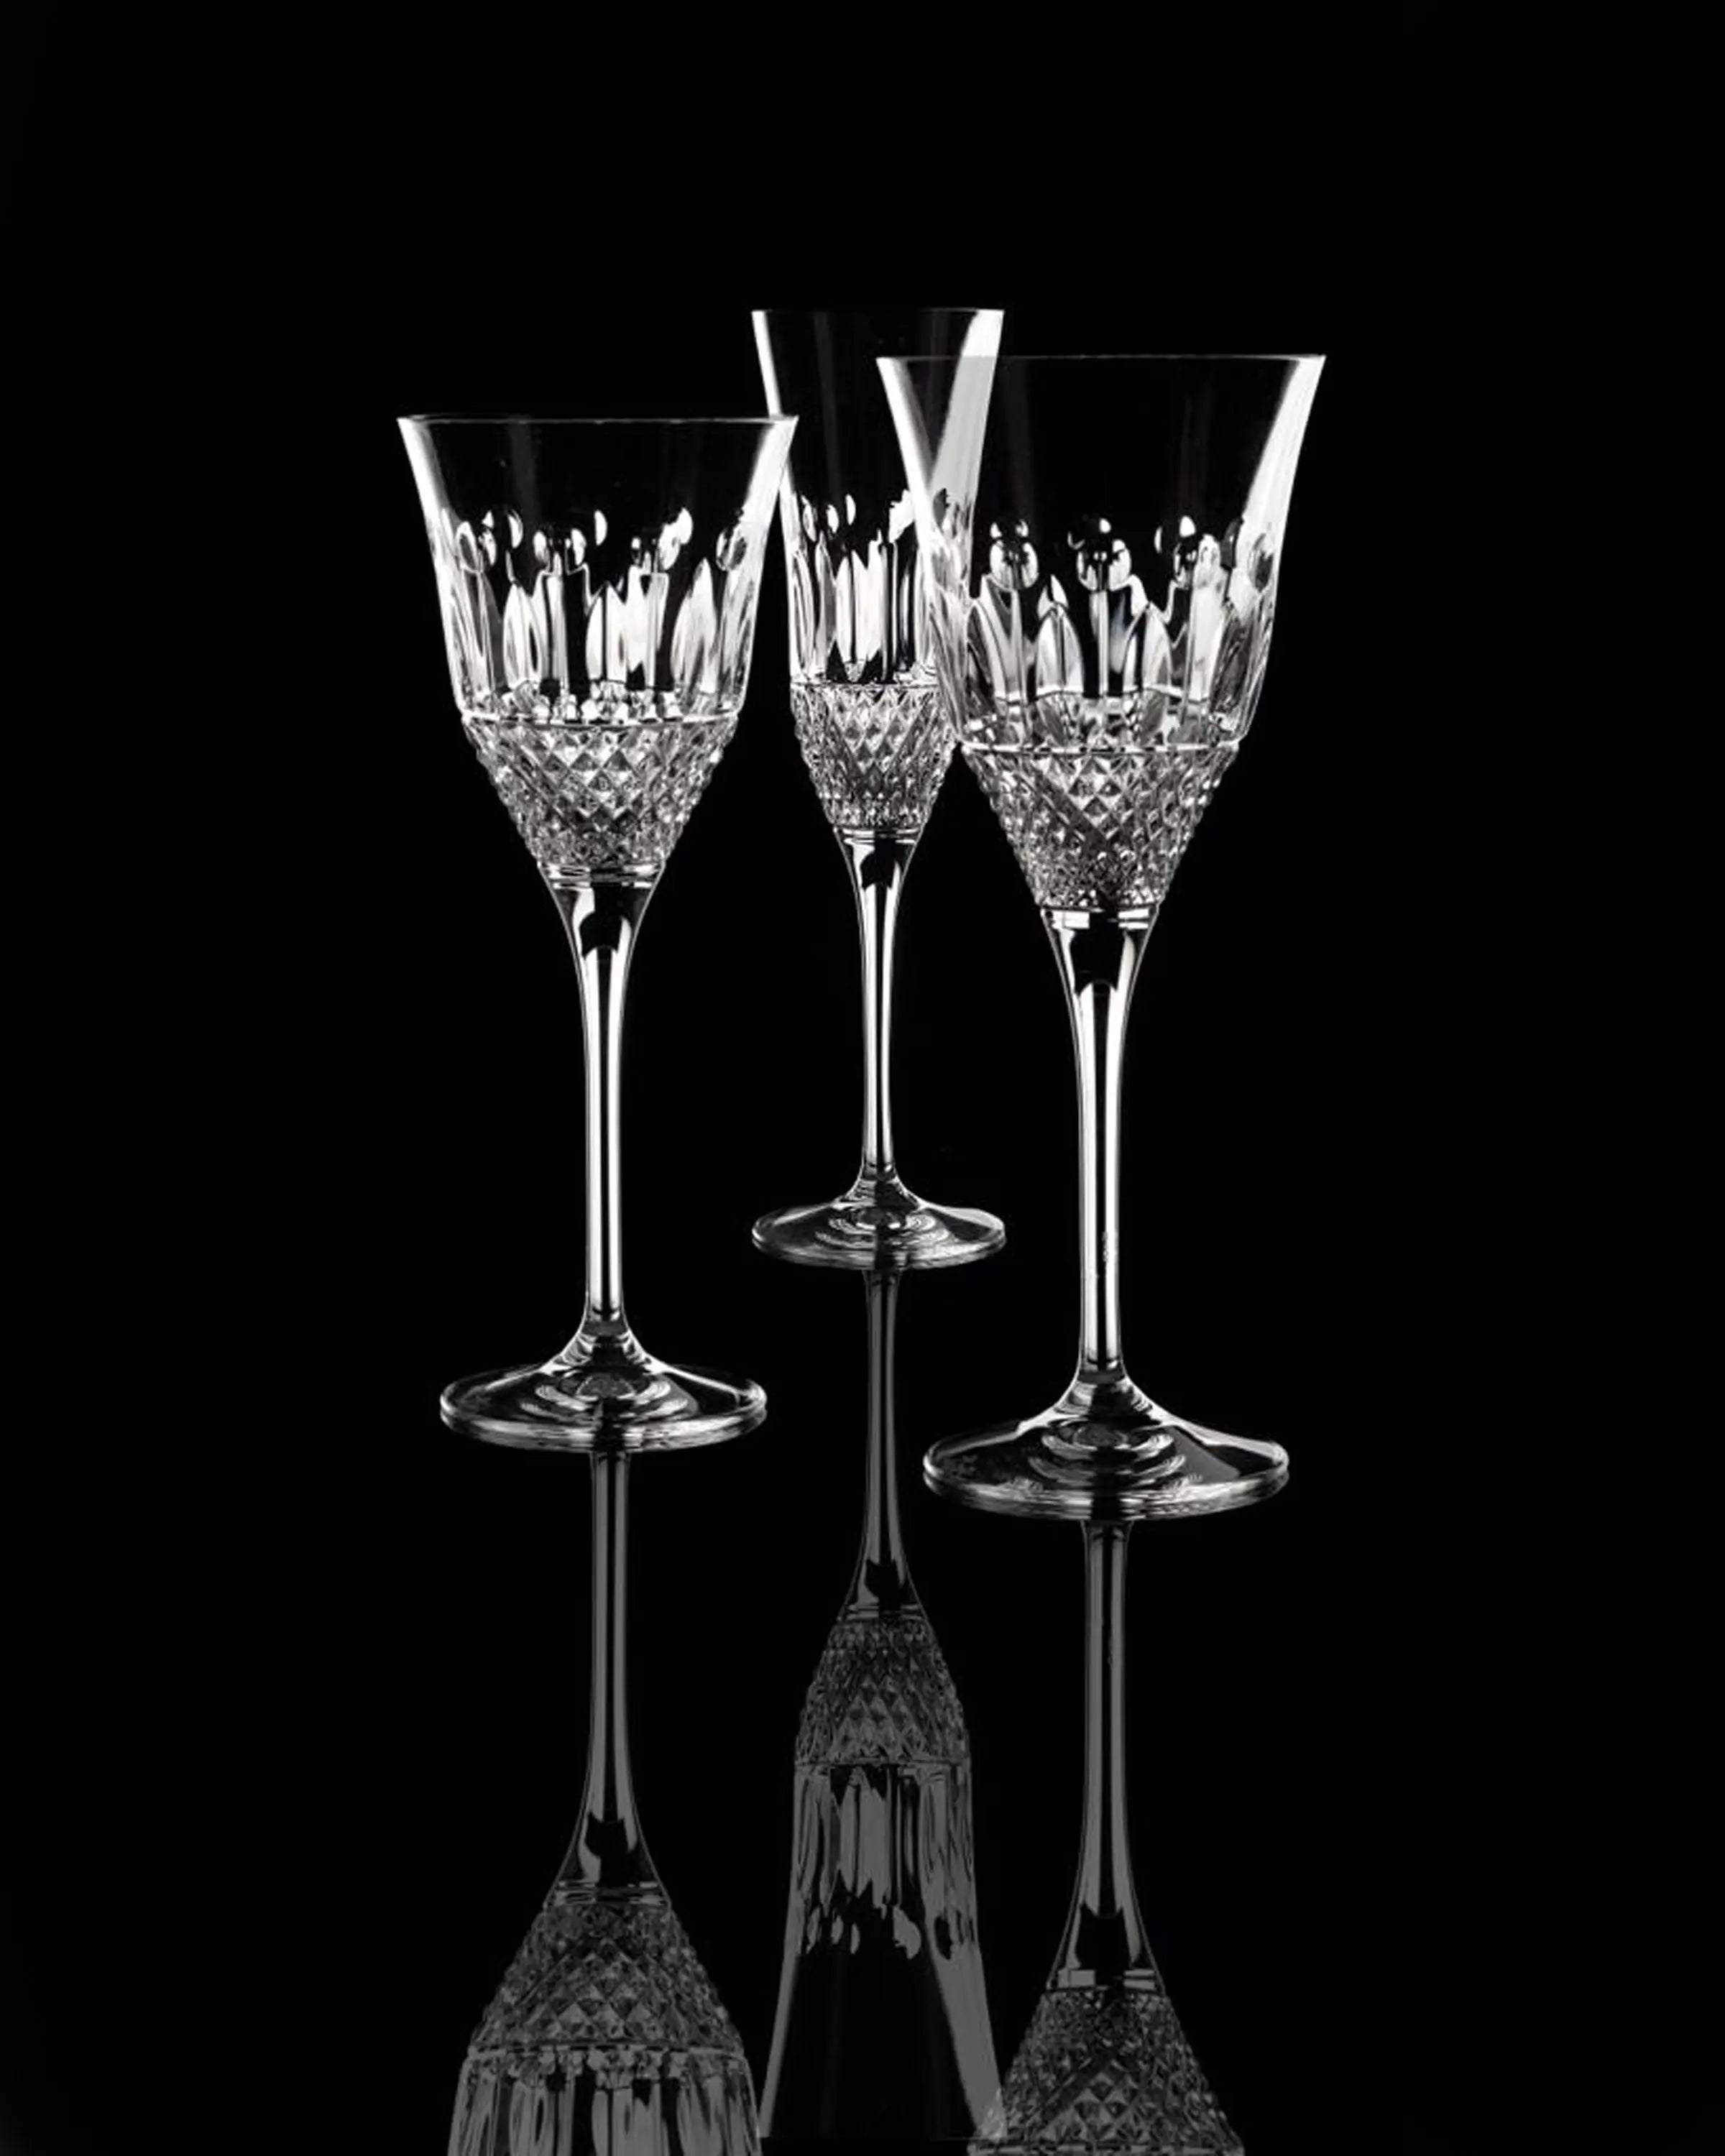 CAVIAR WINE/CHAMPAGNE CRYSTAL GLASSES - SET OF 3 ANGIE HOMES